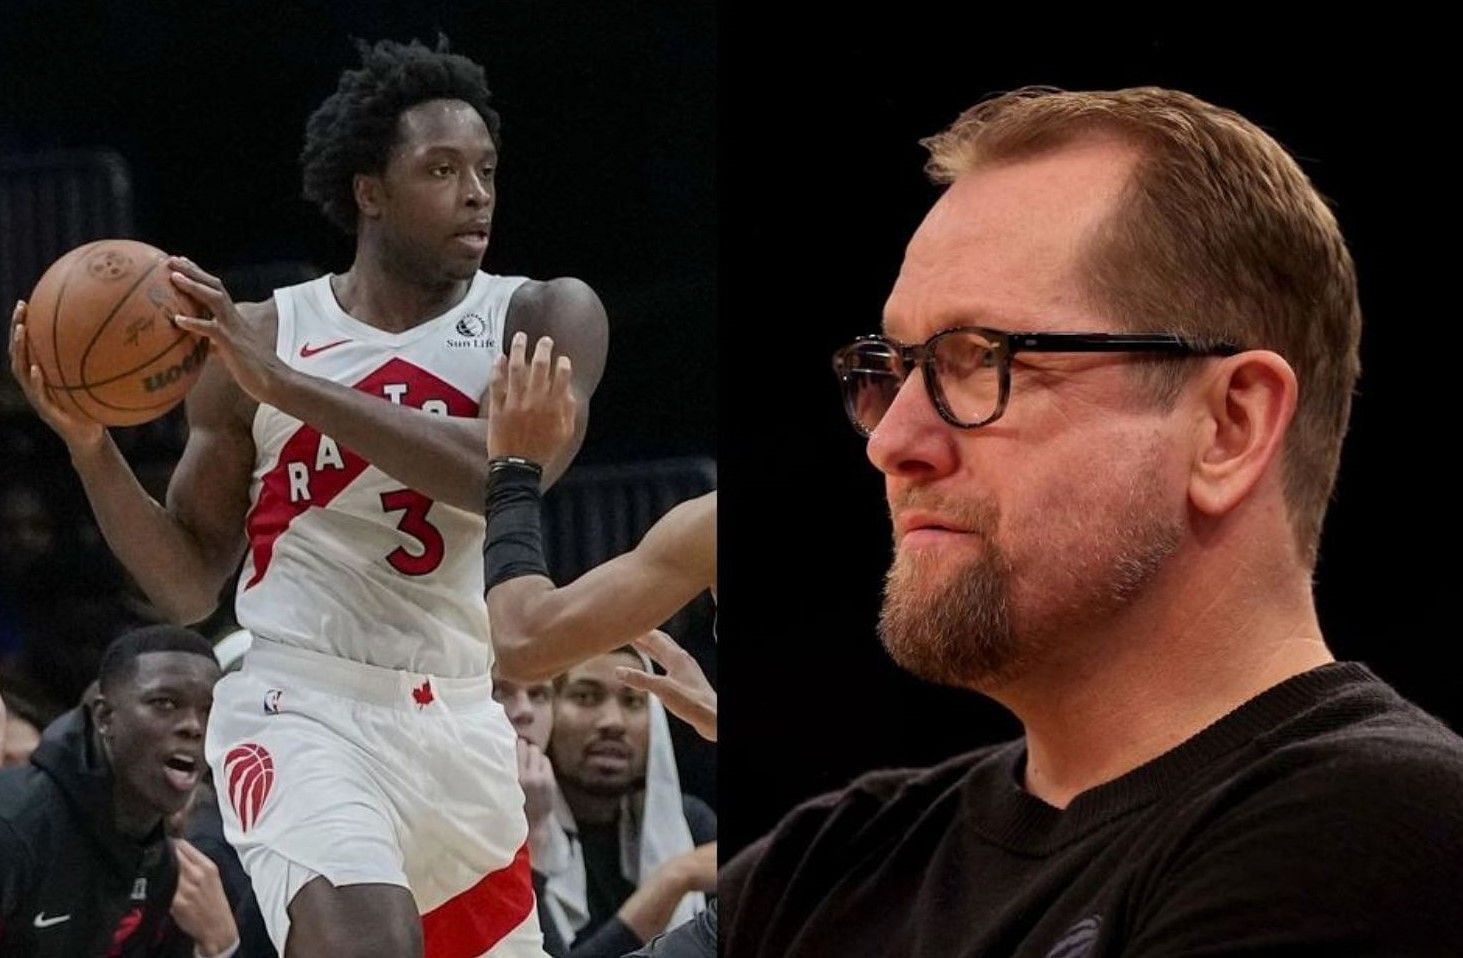 Former Toronto coach Nick Nurse (R) had a funny take on the deal between the Raptors and the New York Knicks involving forward OG Anunoby (L).